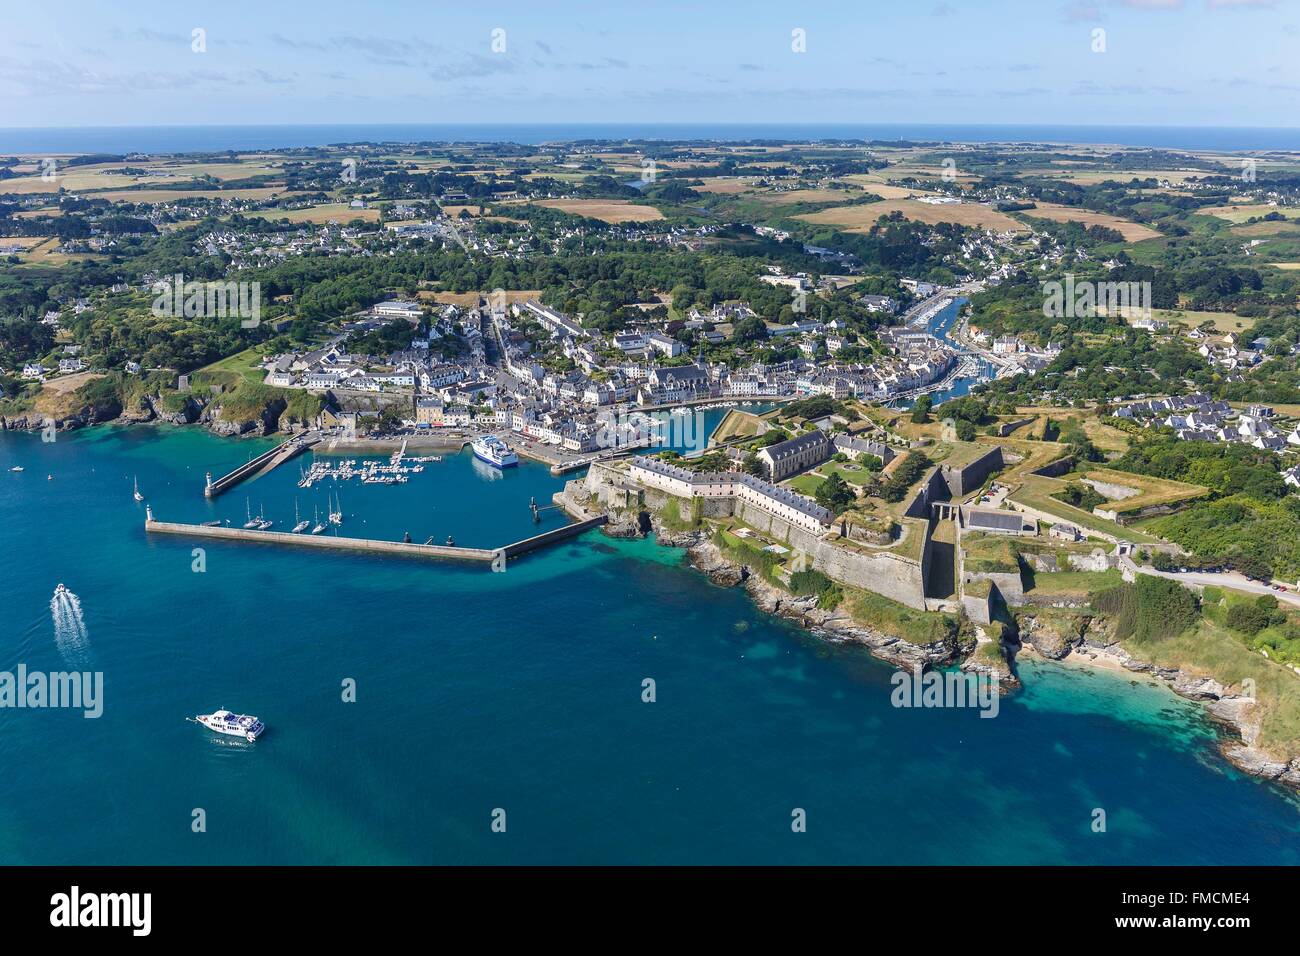 France, Morbihan, Belle Ile, Le Palais, the town, the habour and the Citadel (aerial view) Stock Photo